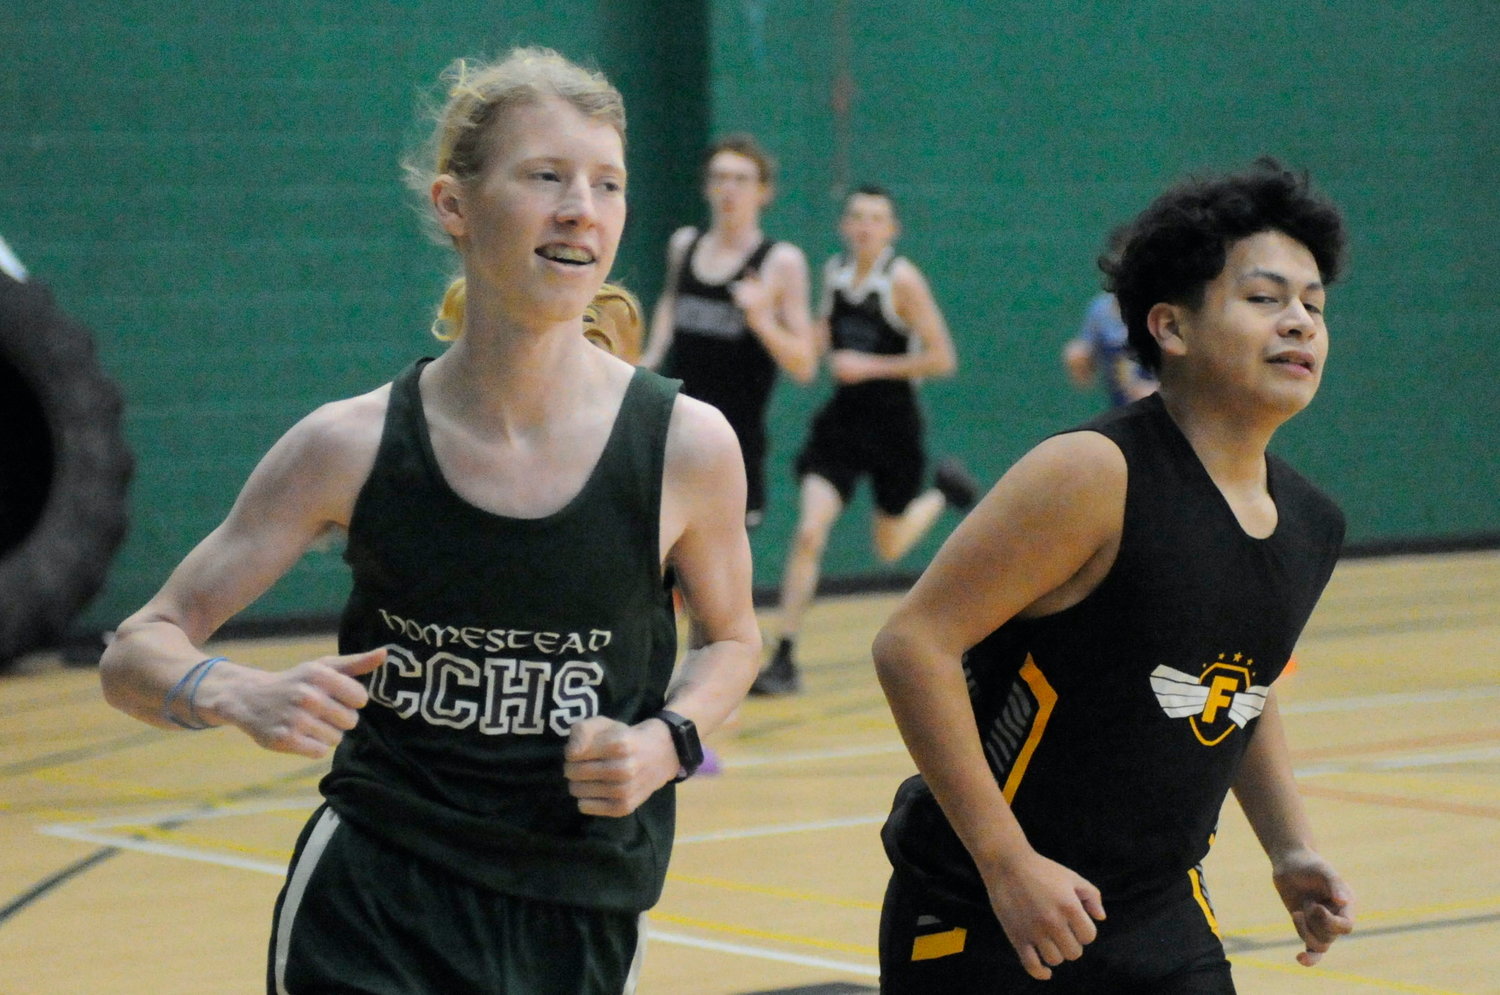 Sprint to the finish. Bryce Shannon is pictured on SUNY Sullivan’s indoor track with a long-distance runner from Fallsburg.